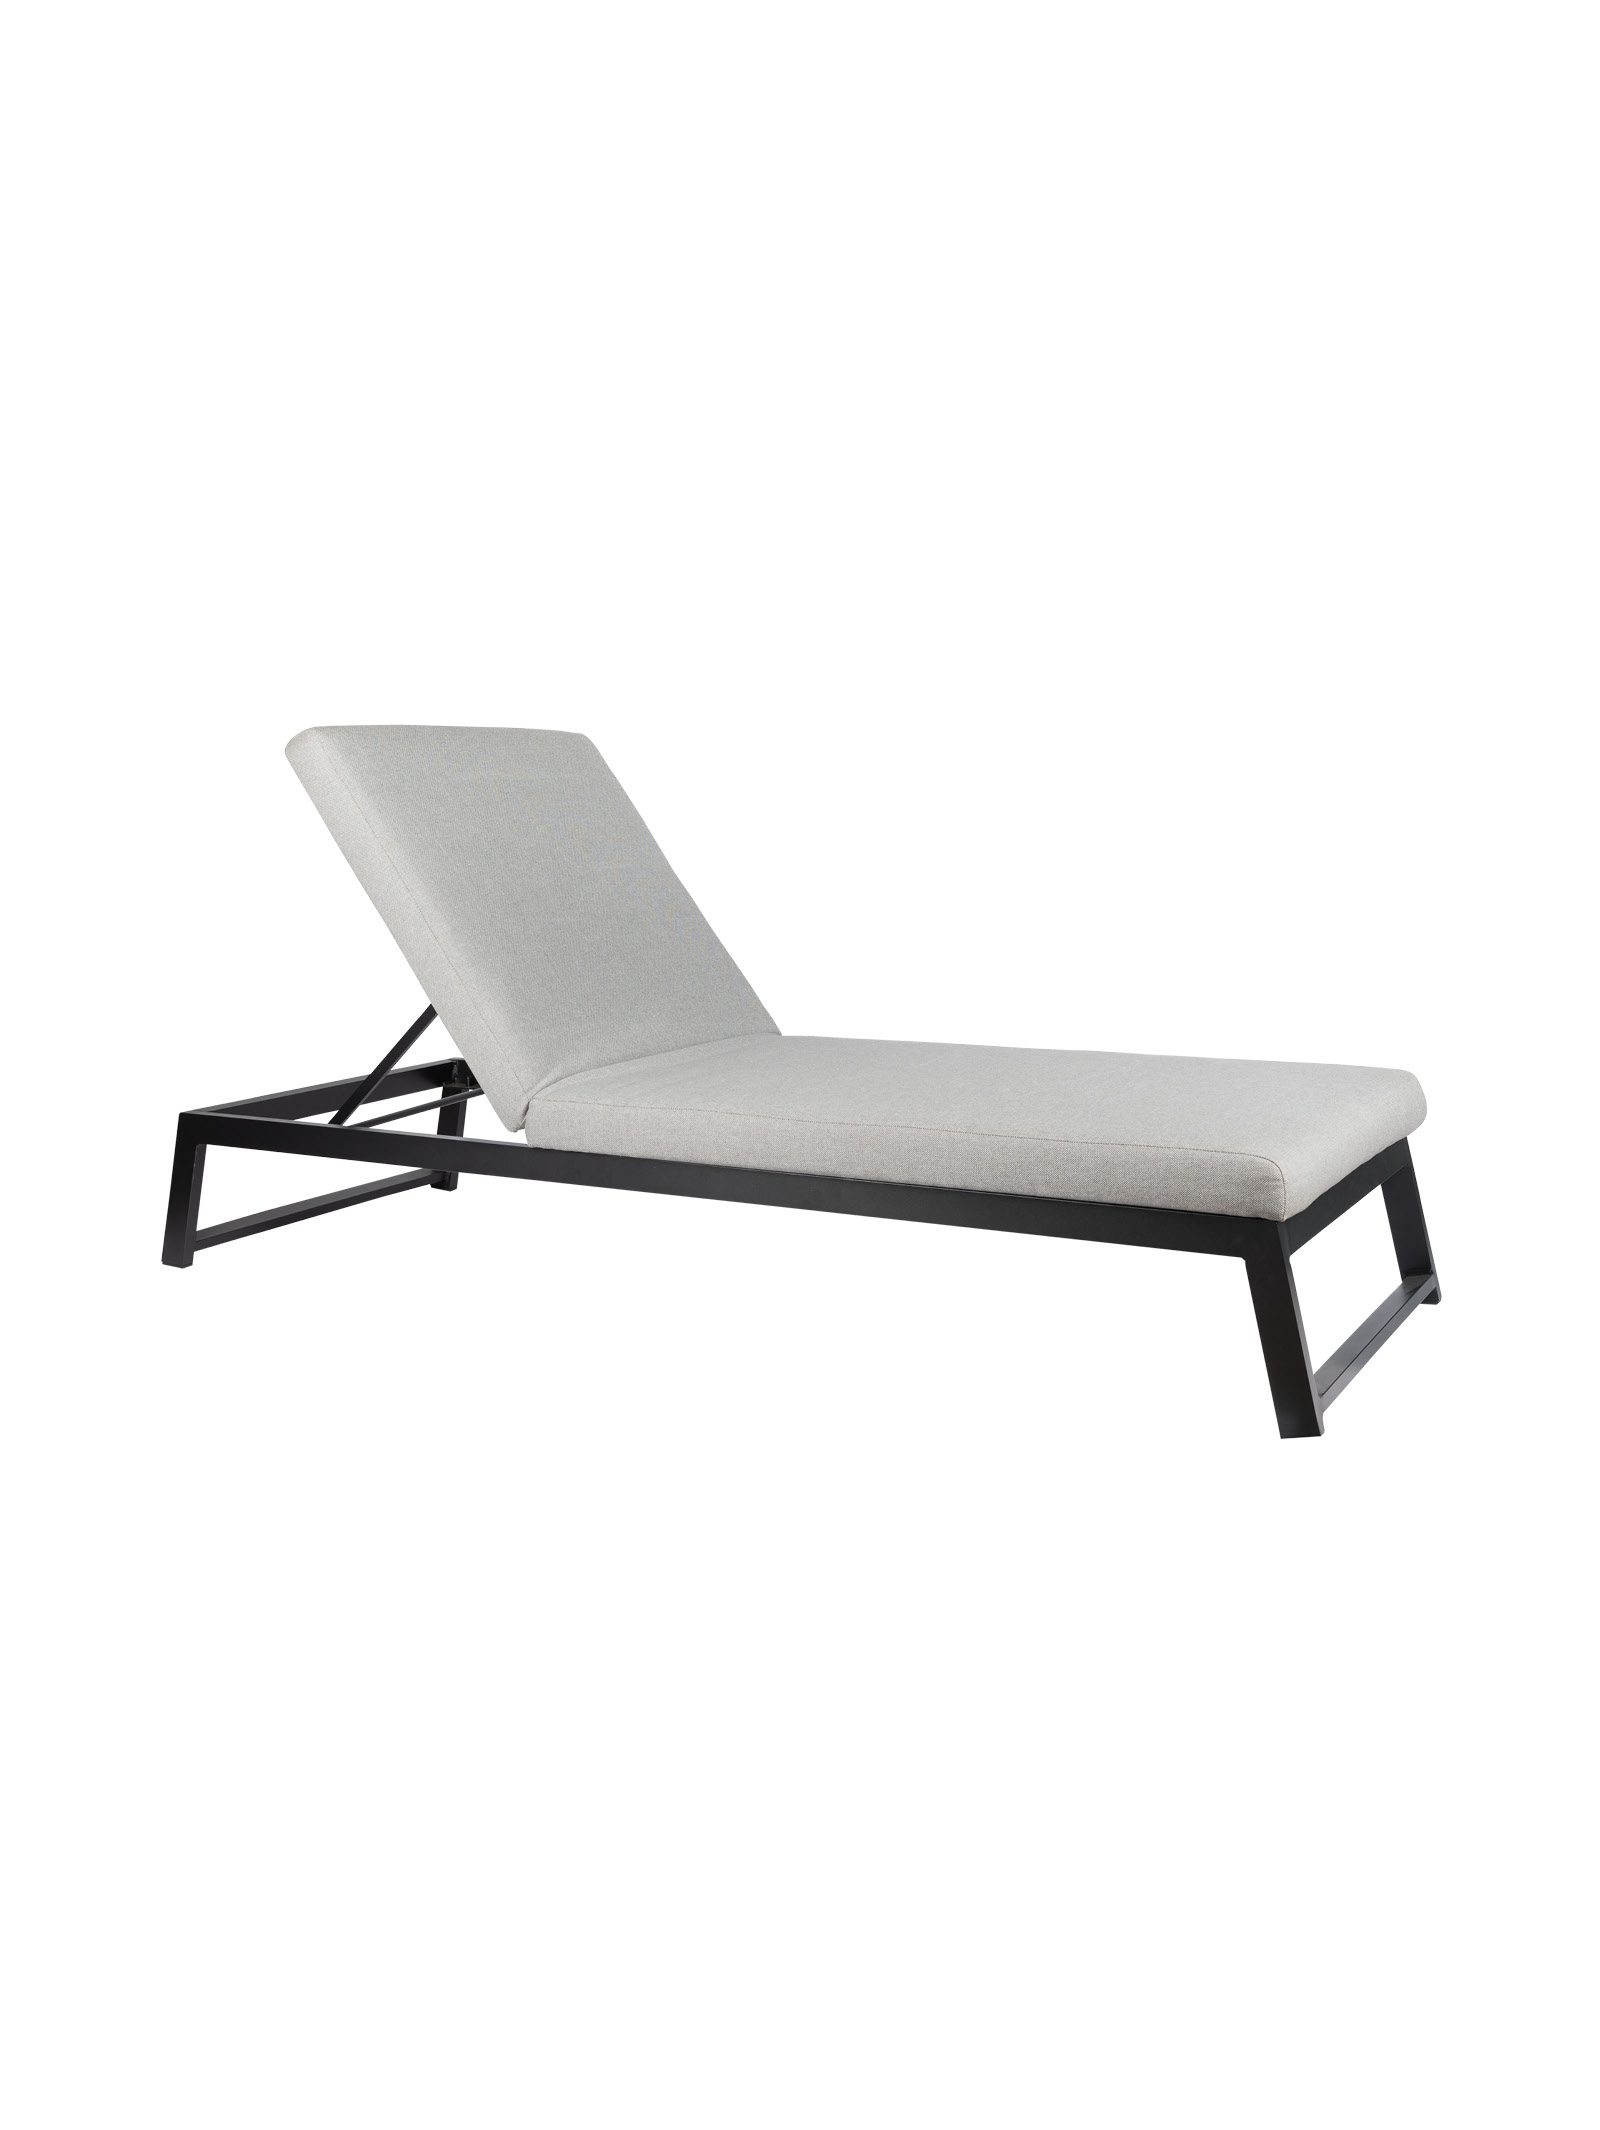 Tangier Outdoor Lounger in Gravel Road